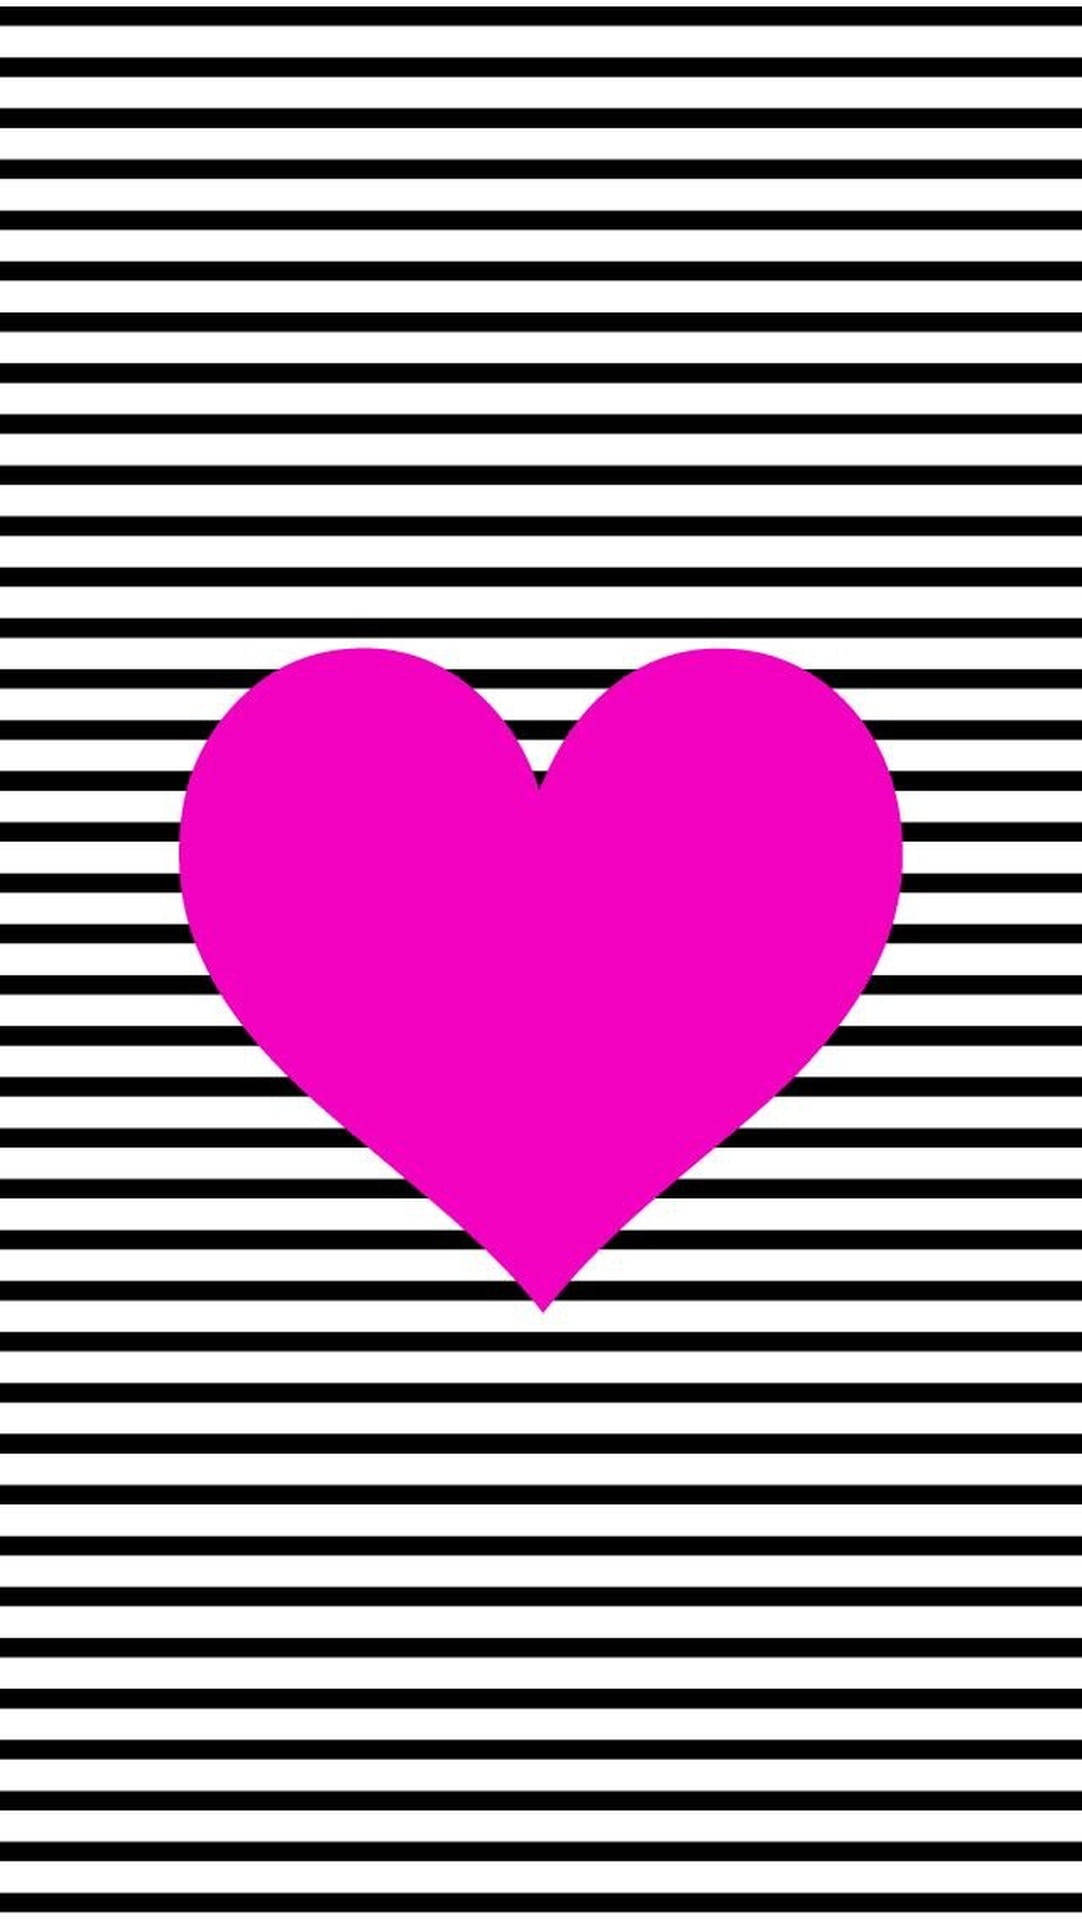 Black And White Stripe Pink Heart